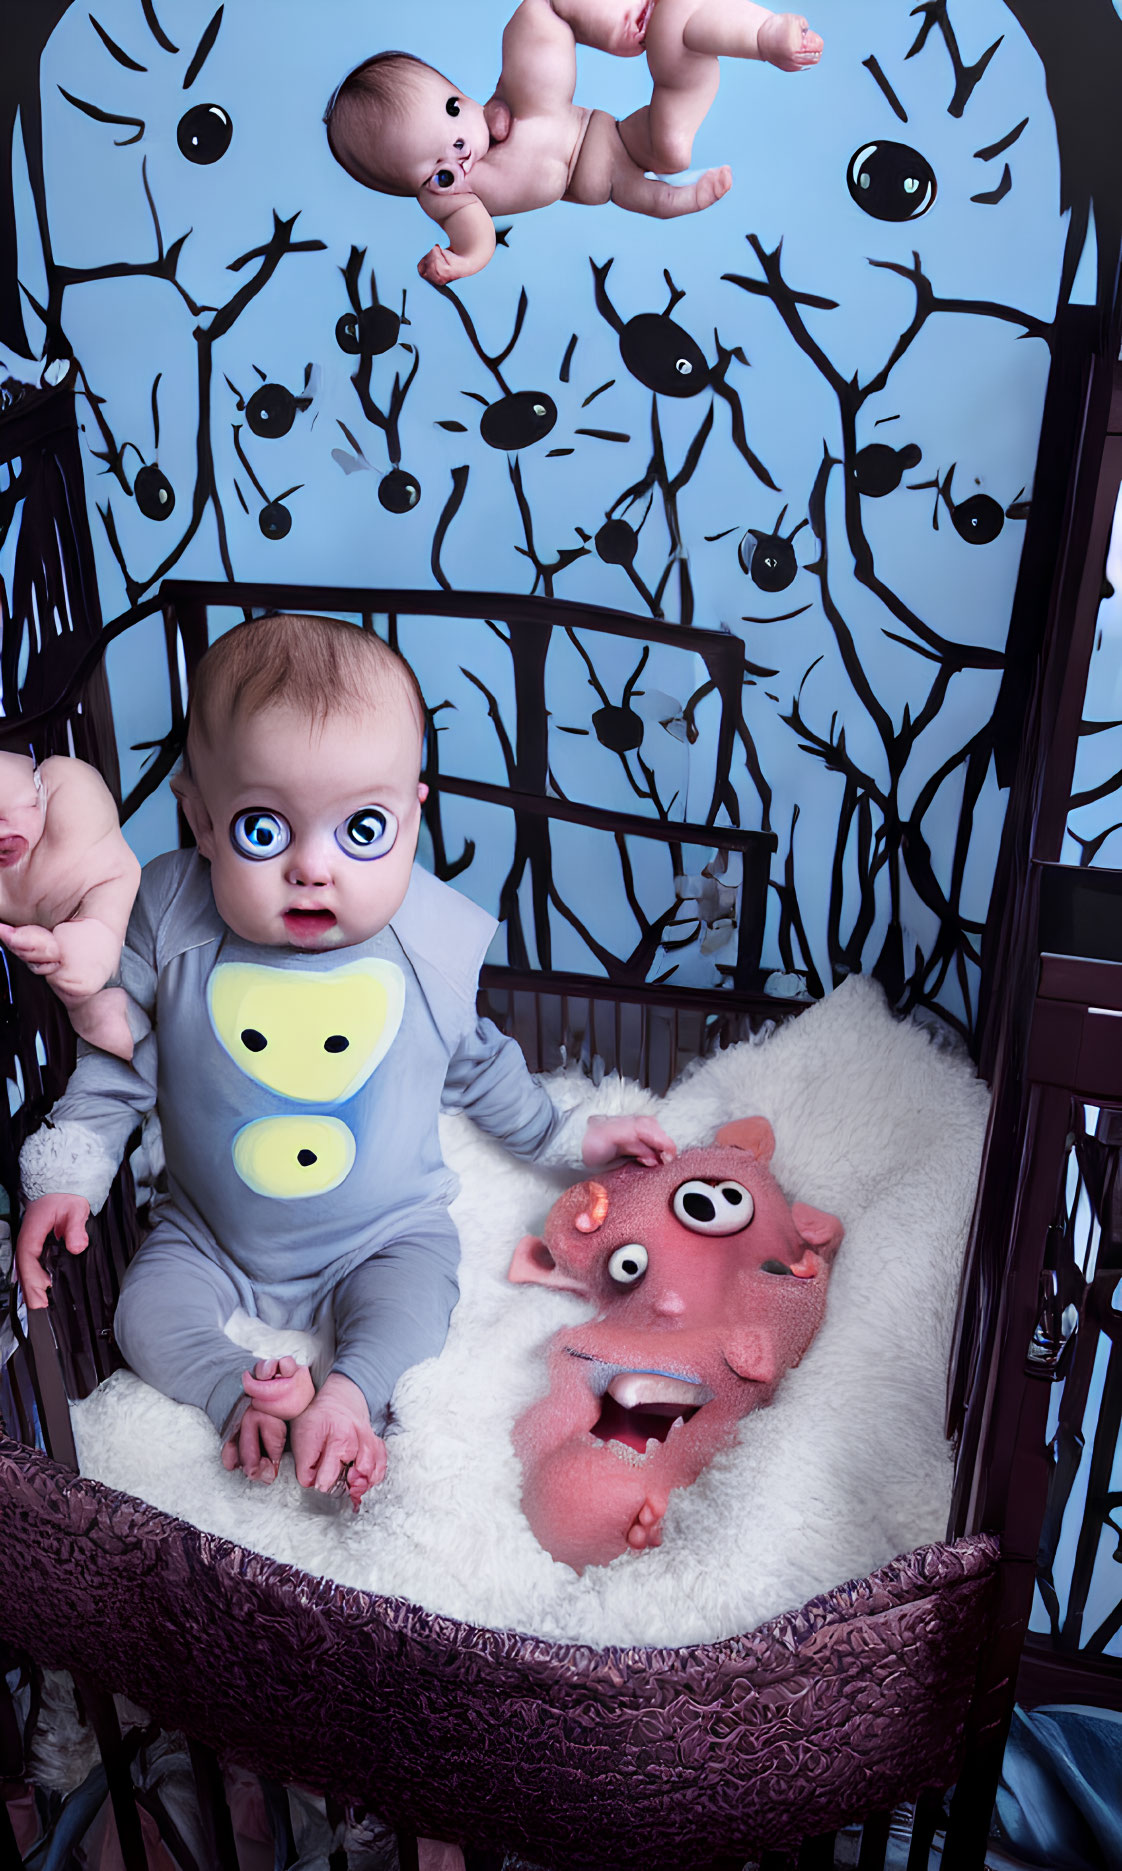 Baby in onesie with whimsical monster plush toy in fantasy crib